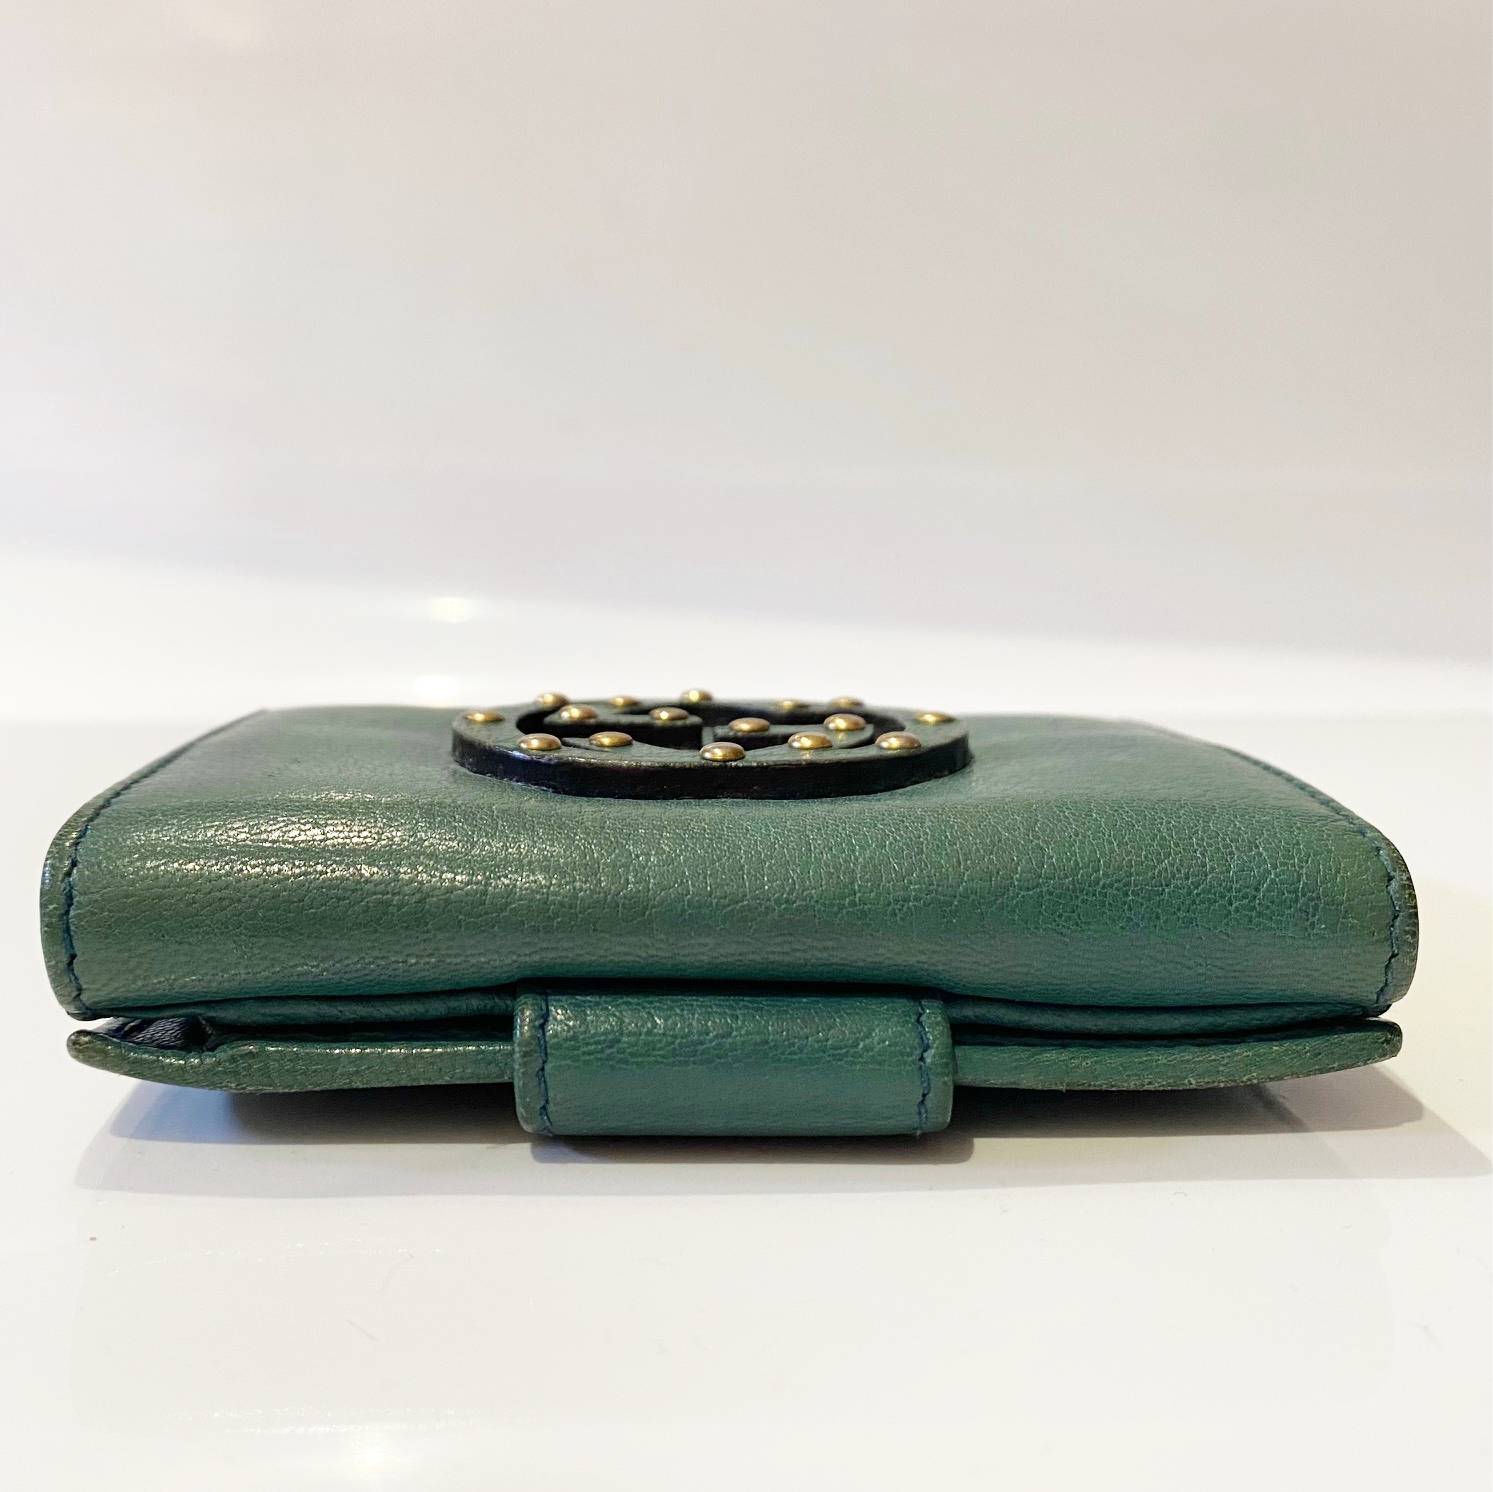 2000s Gucci Blondie Green Leather Wallet - style - CHNGR